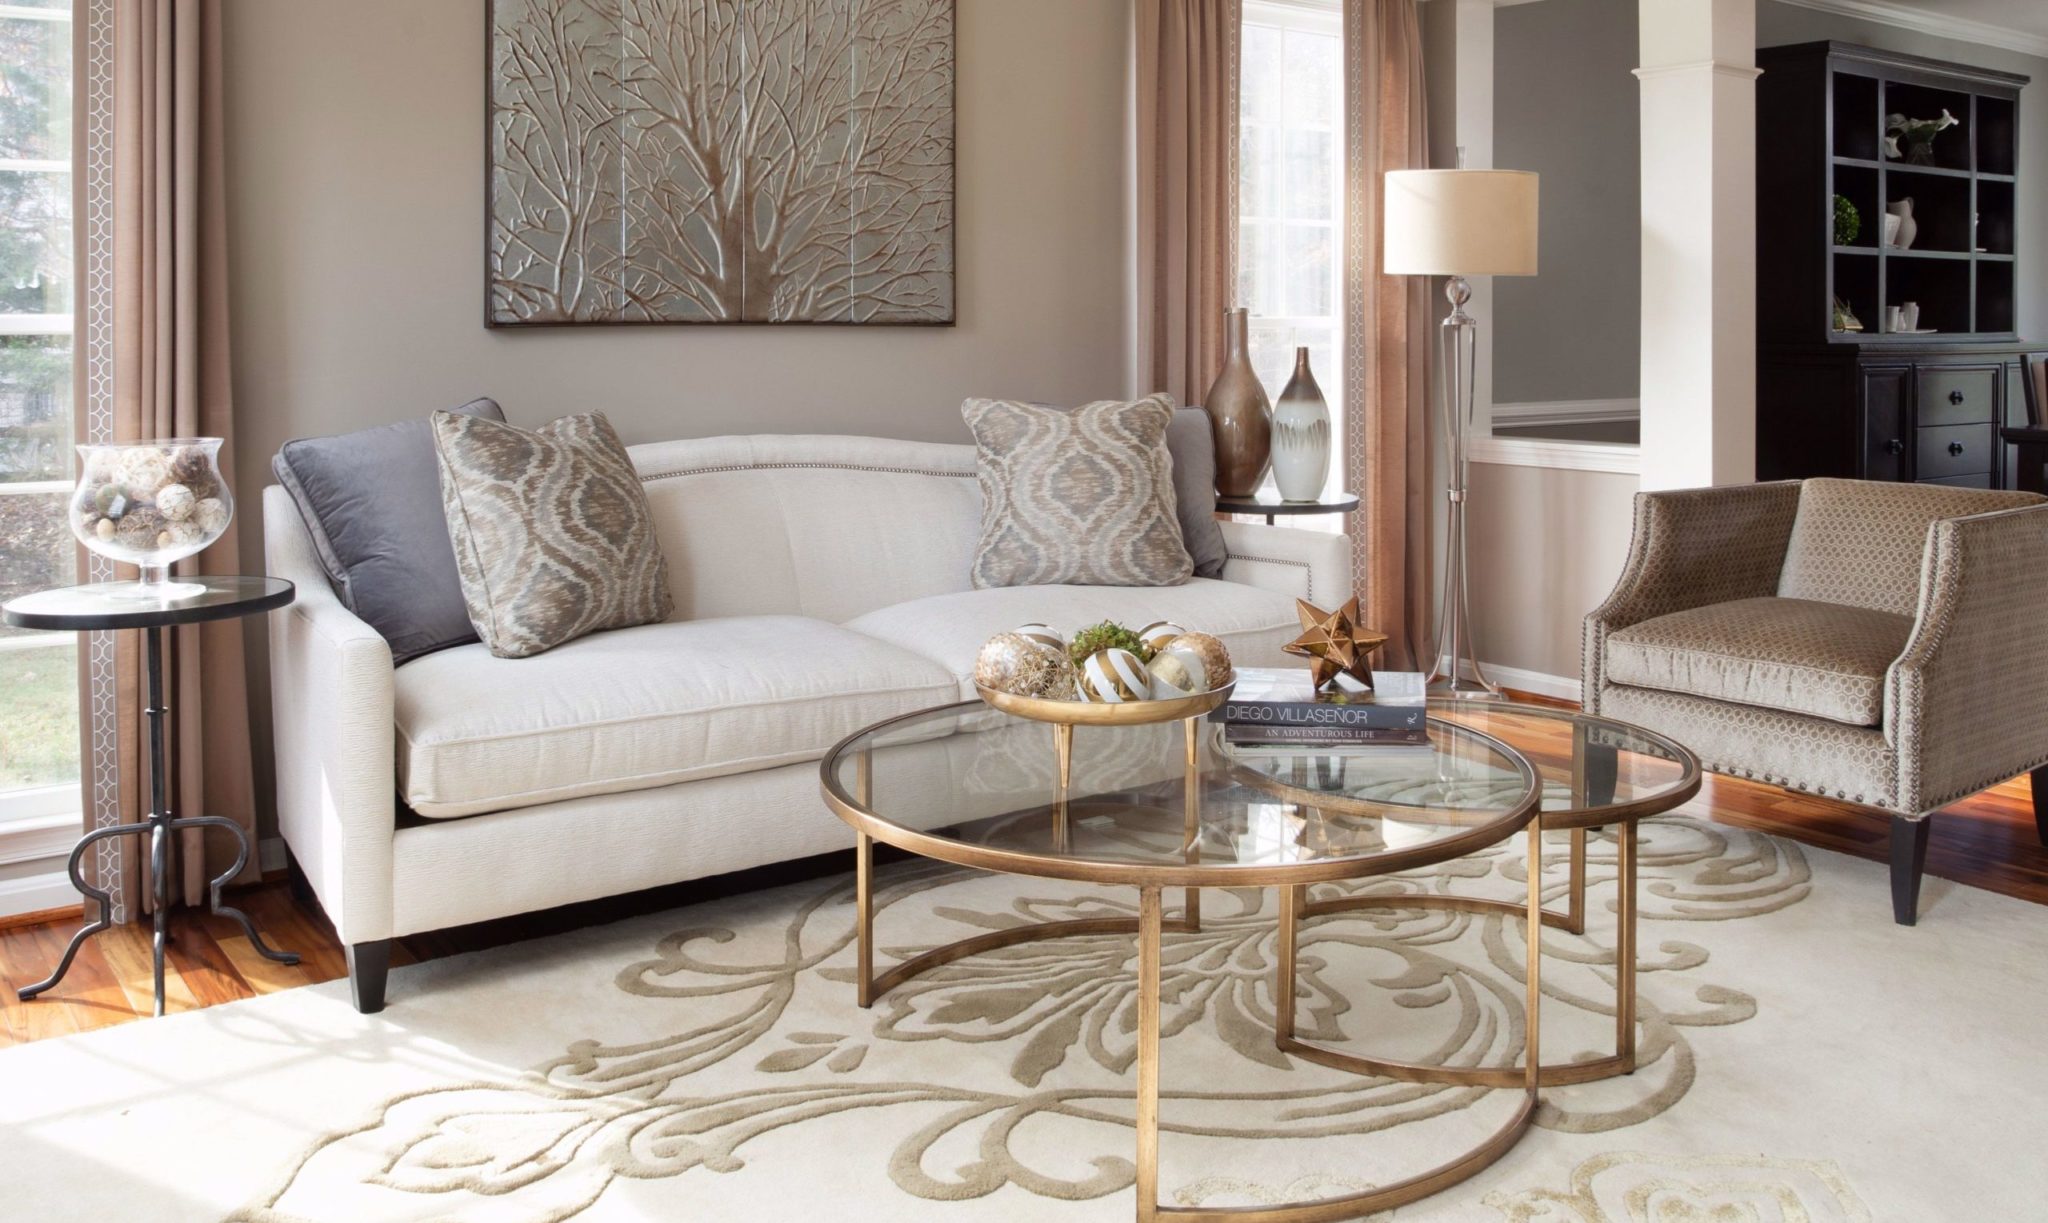 Tips and Tricks for Styling the Coffee Table